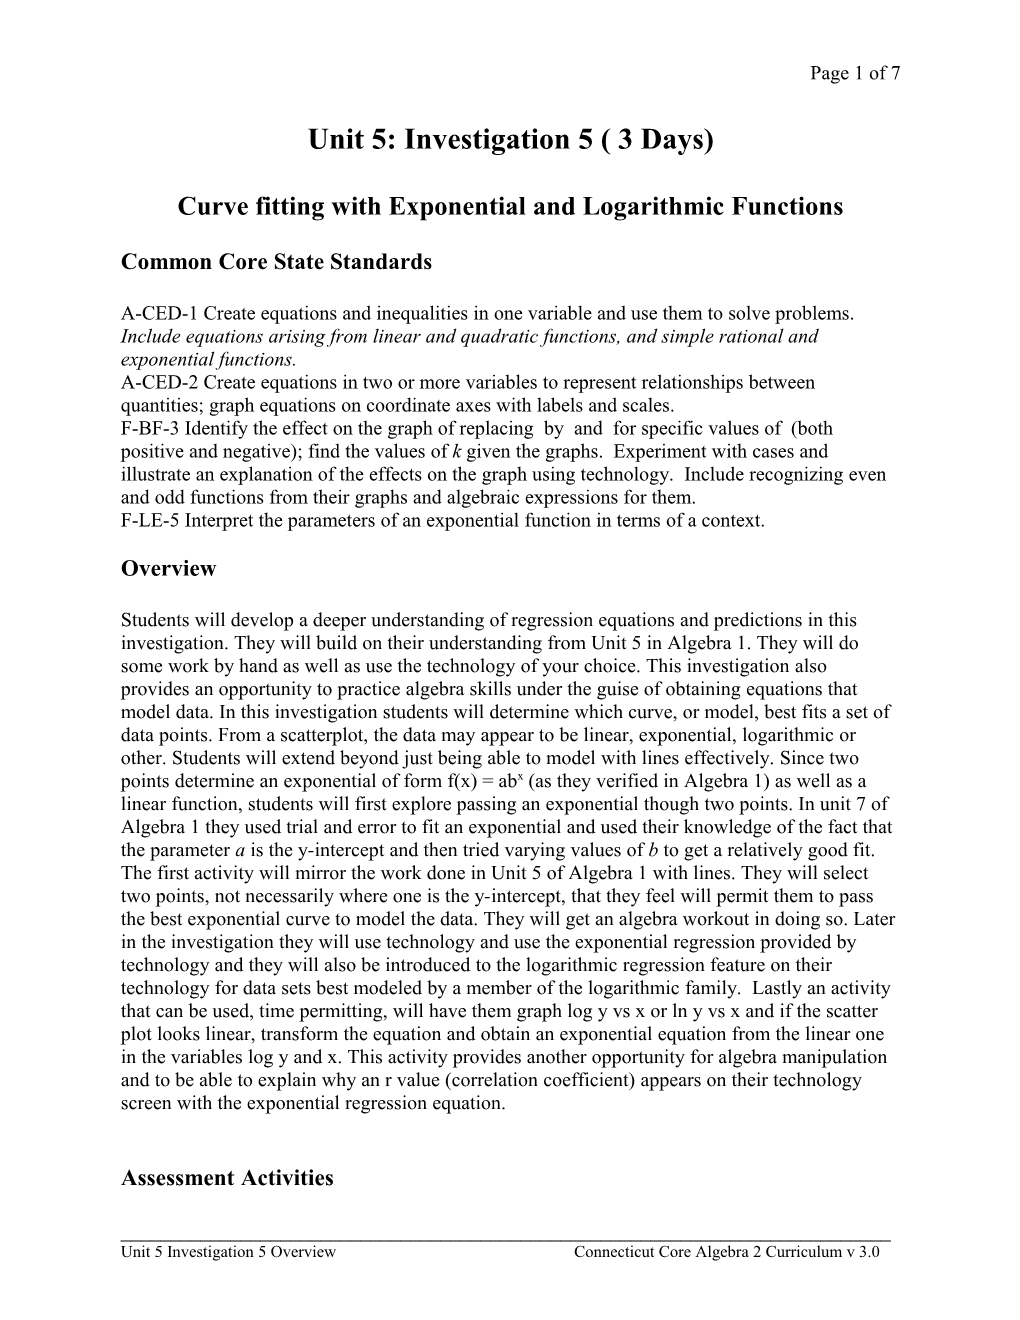 Curve Fitting with Exponential and Logarithmic Functions